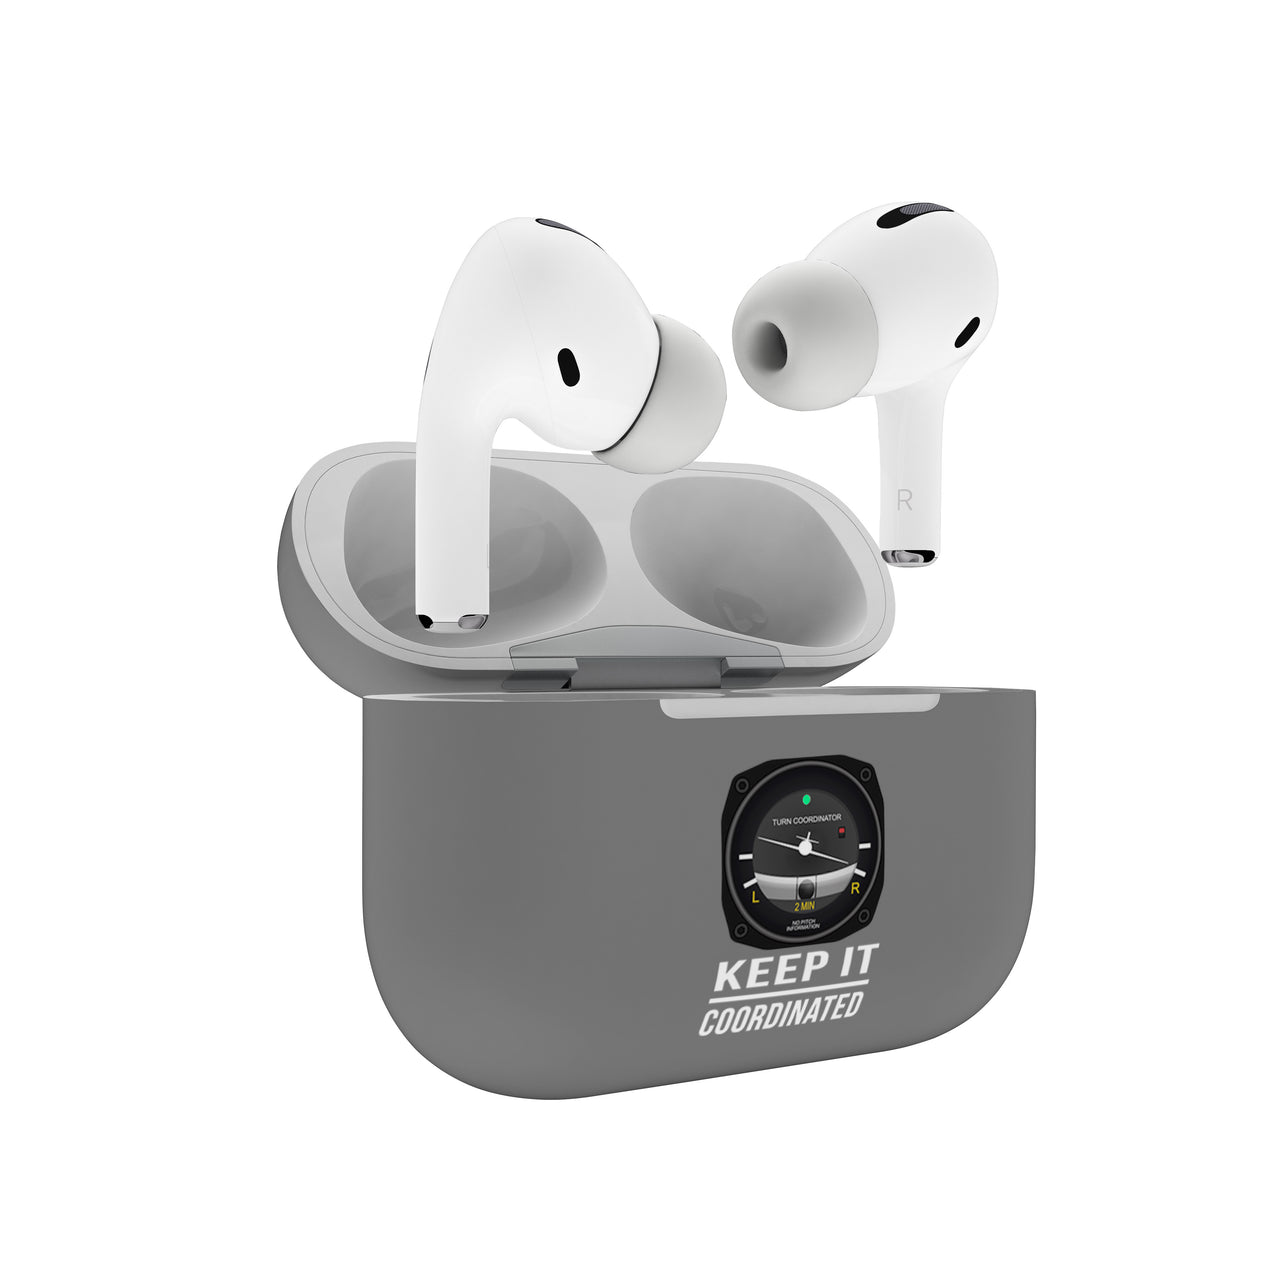 Keep It Coordinated Designed AirPods  Cases